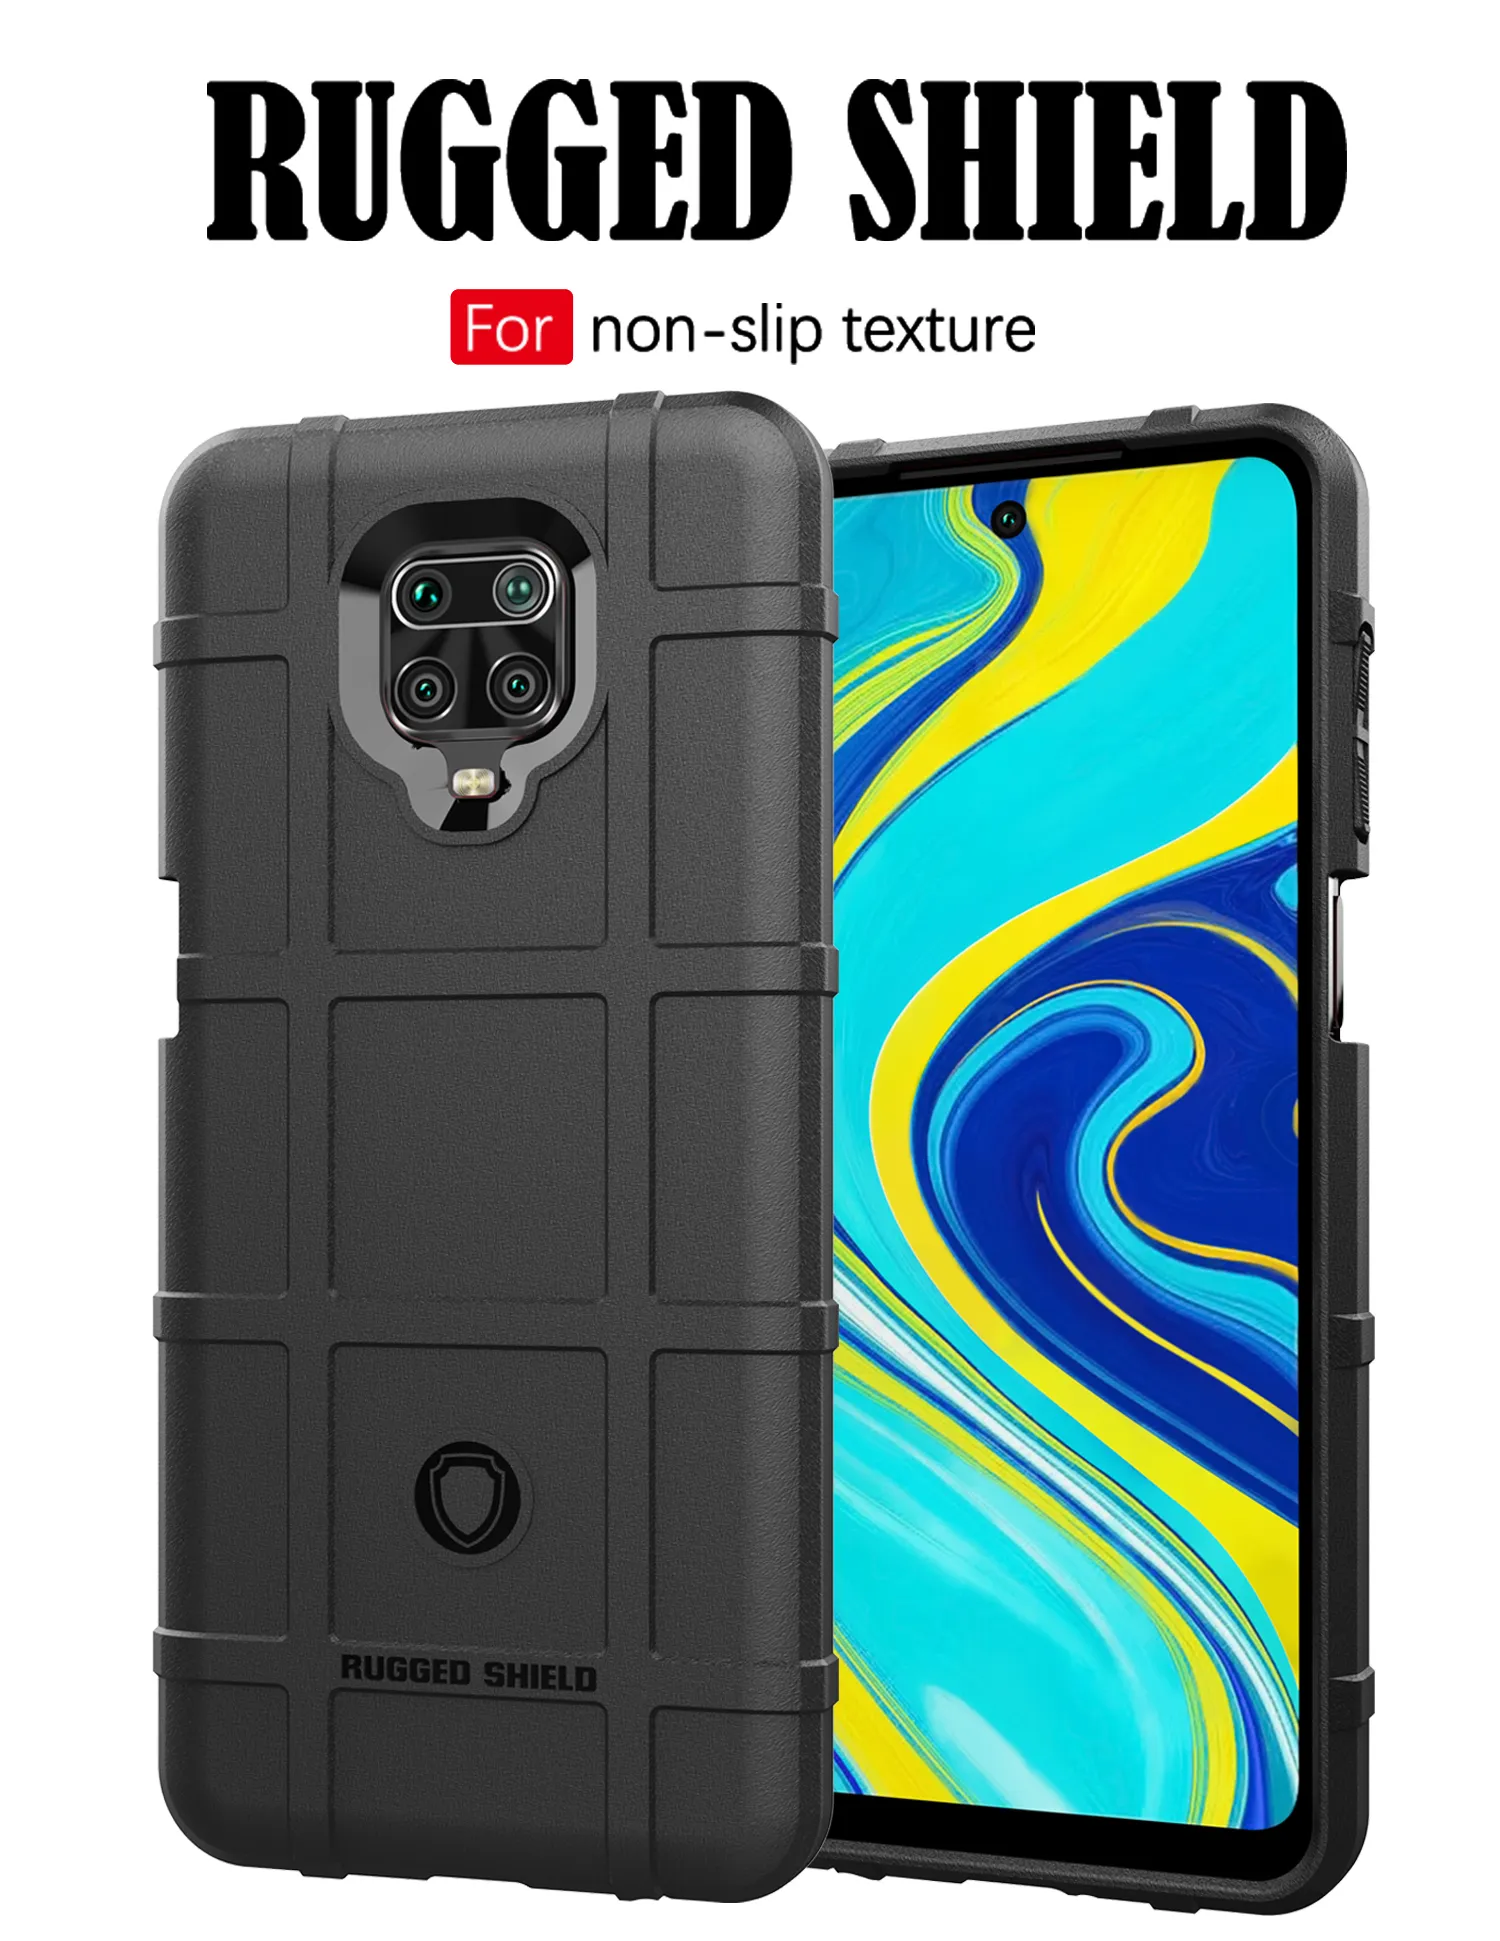 Protective Cases For Xiaomi Mobile Phone, Rugged Silicone Case, Shockproof, For Redmi Note 9s, 9 Max, 9a, 9c, 8t, 8, 7, 6 Pro, 6a, 8a, 7a,